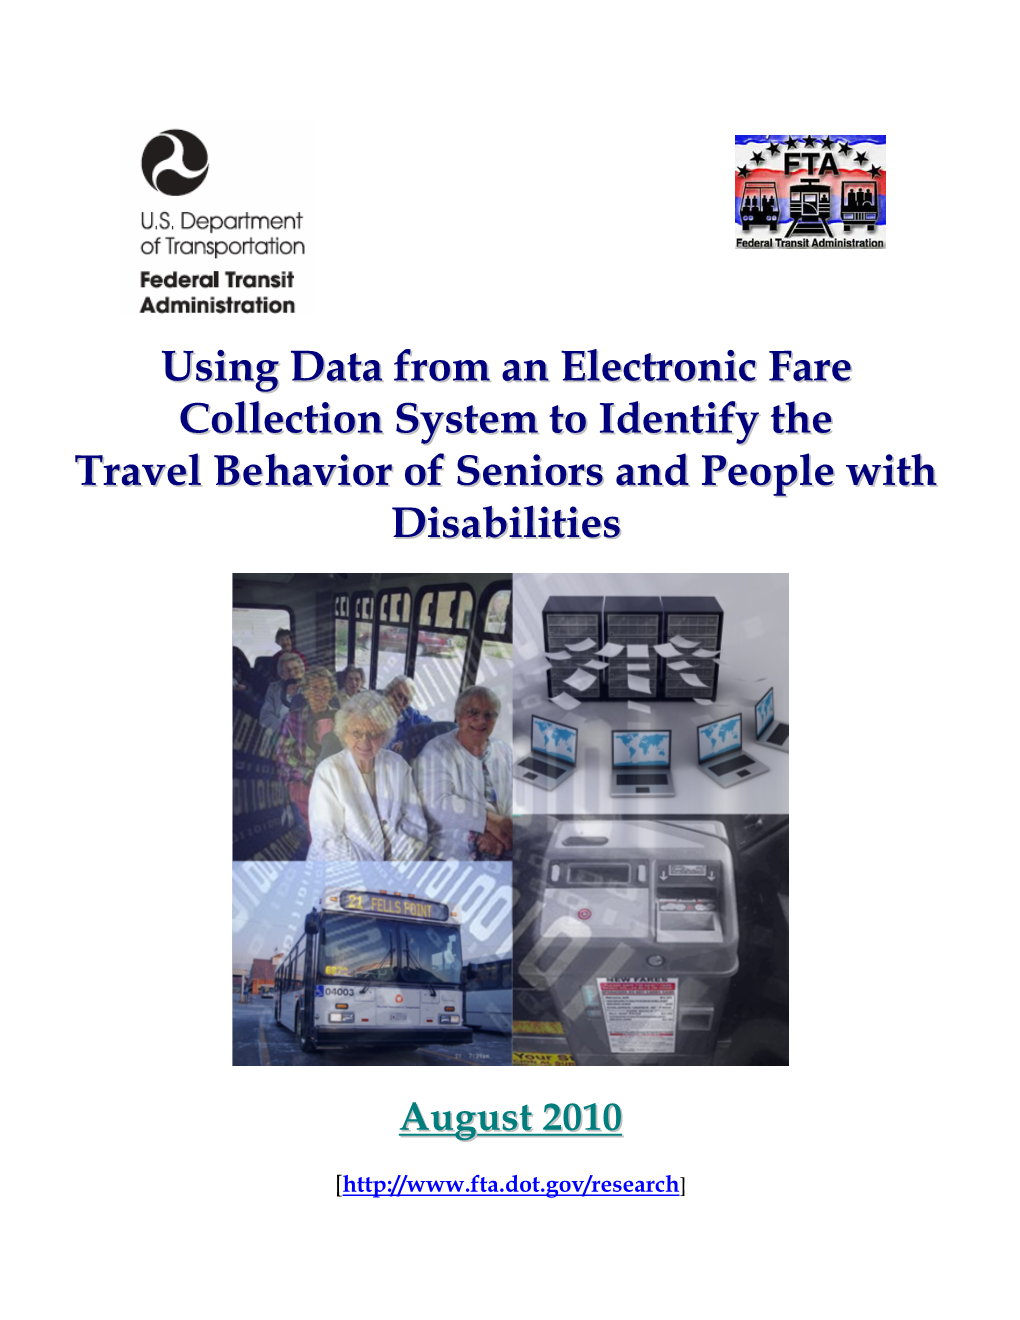 Using Data from an Electronic Fare Collection System to Identify the Travel Behavior of Seniors and People with Disabilities